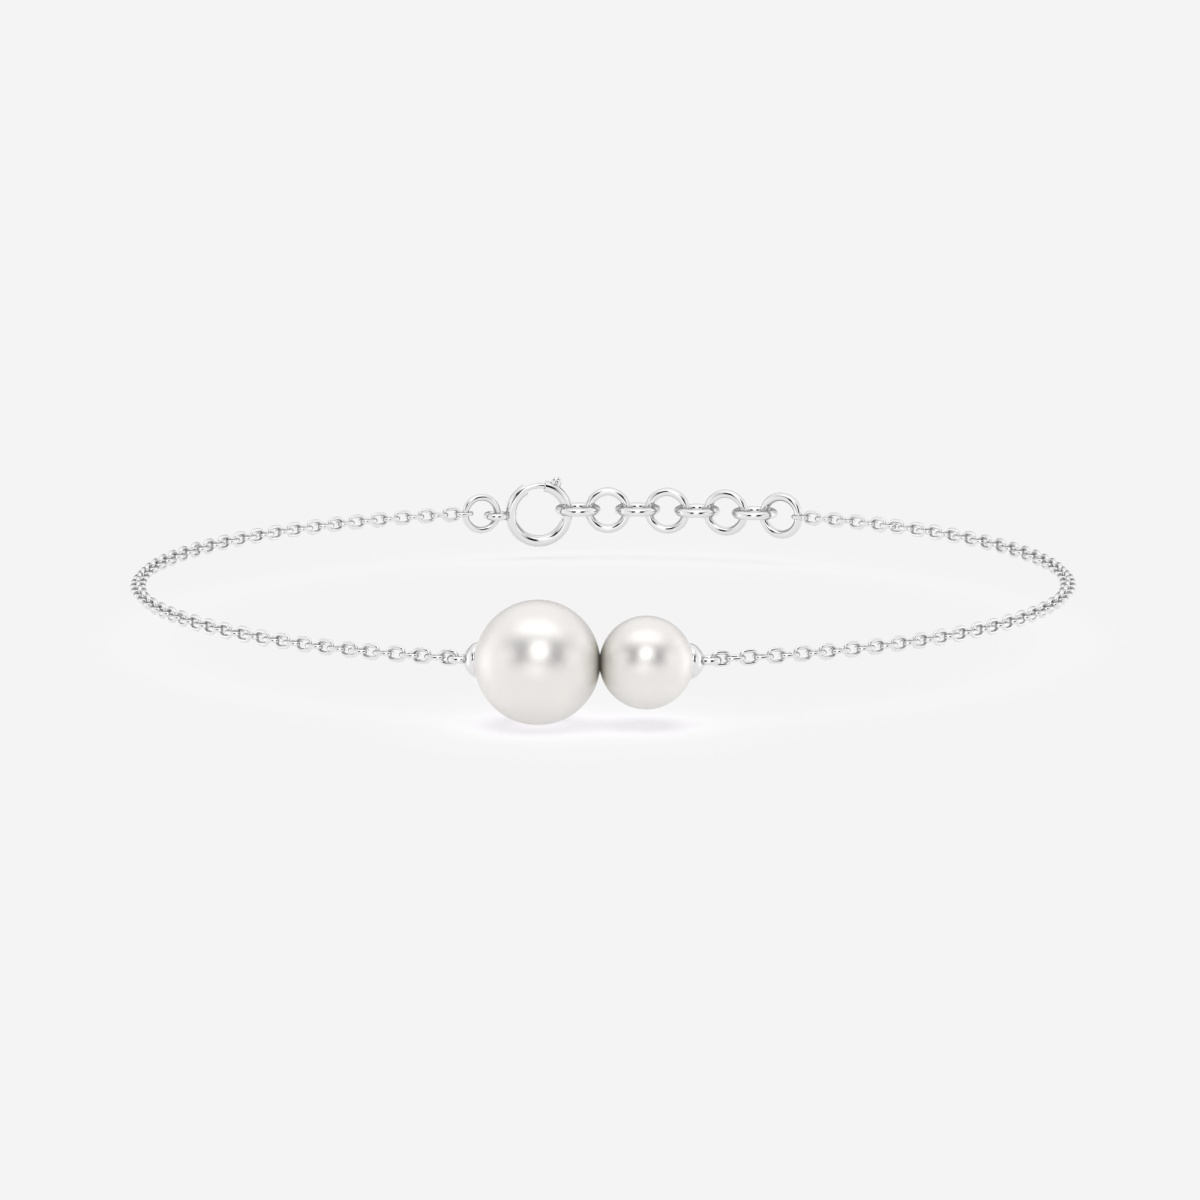 5.5 - 8.0 mm Cultured Freshwater Pearl Double Stone Adjustable Chain Bracelet - 7-8 Inches